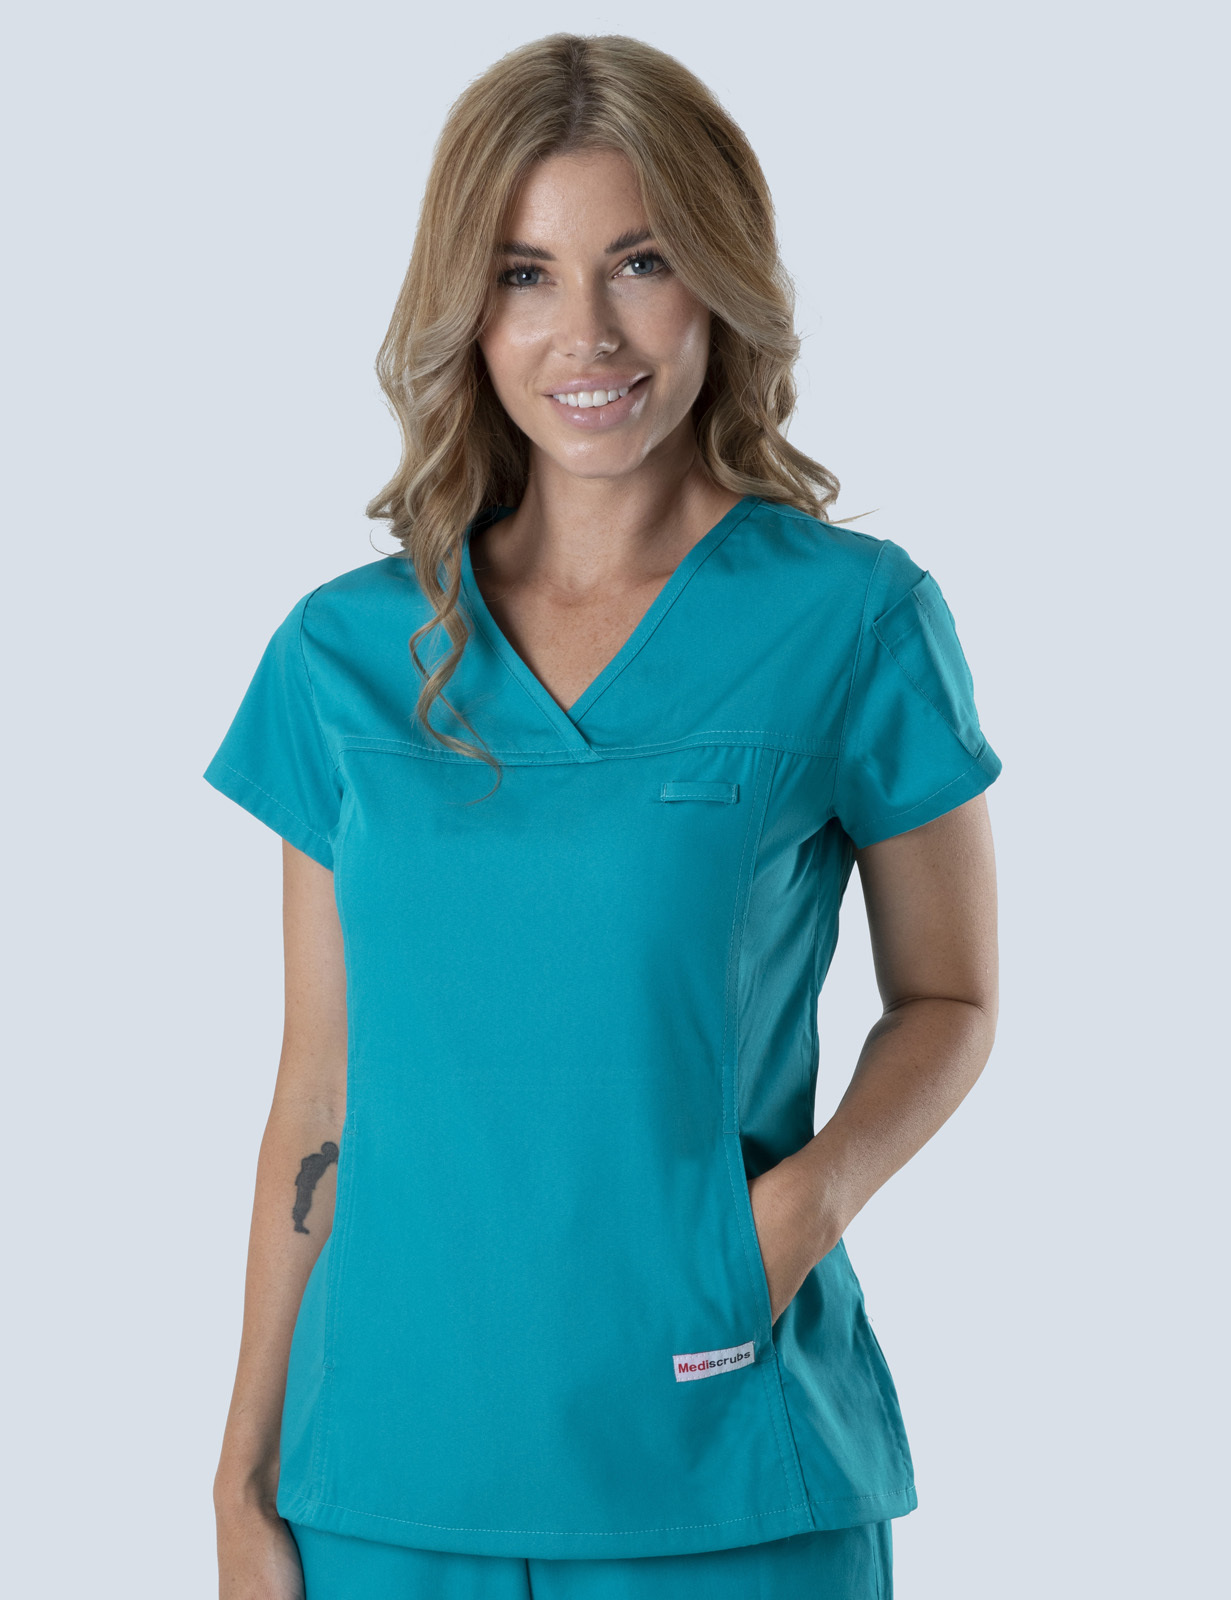 Gold Coast University Hospital - Intensive Care Unit (Women's Fit Solid Scrub Top and Cargo Pants in Teal incl Logos)